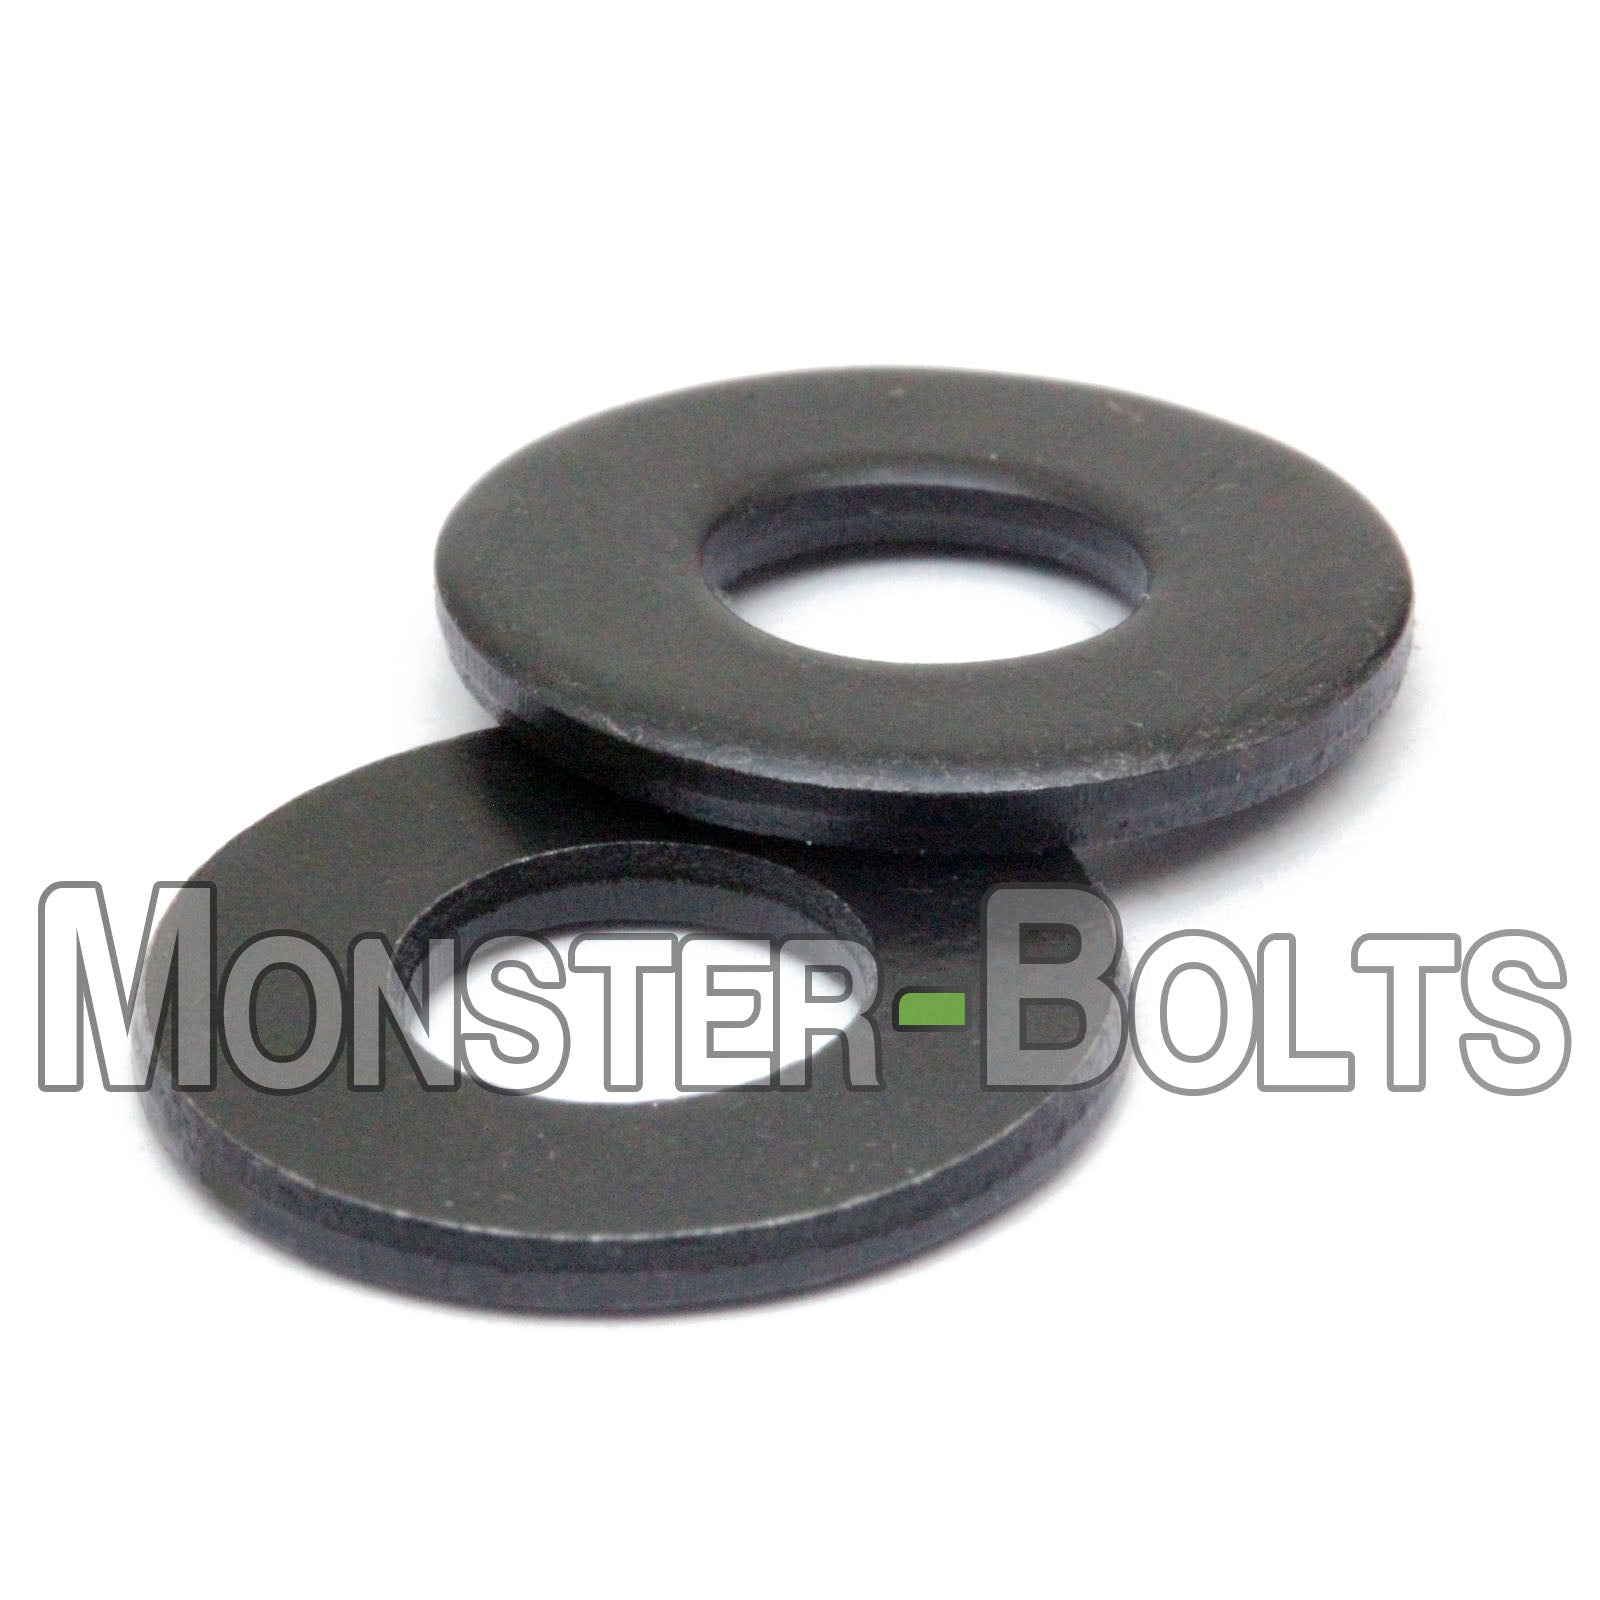 Heavy Duty 0.281 ID 0.281 Nominal Thickness 1/4 Hole Size 1.500 OD Steel Flat Washer Black Oxide Finish Made in US